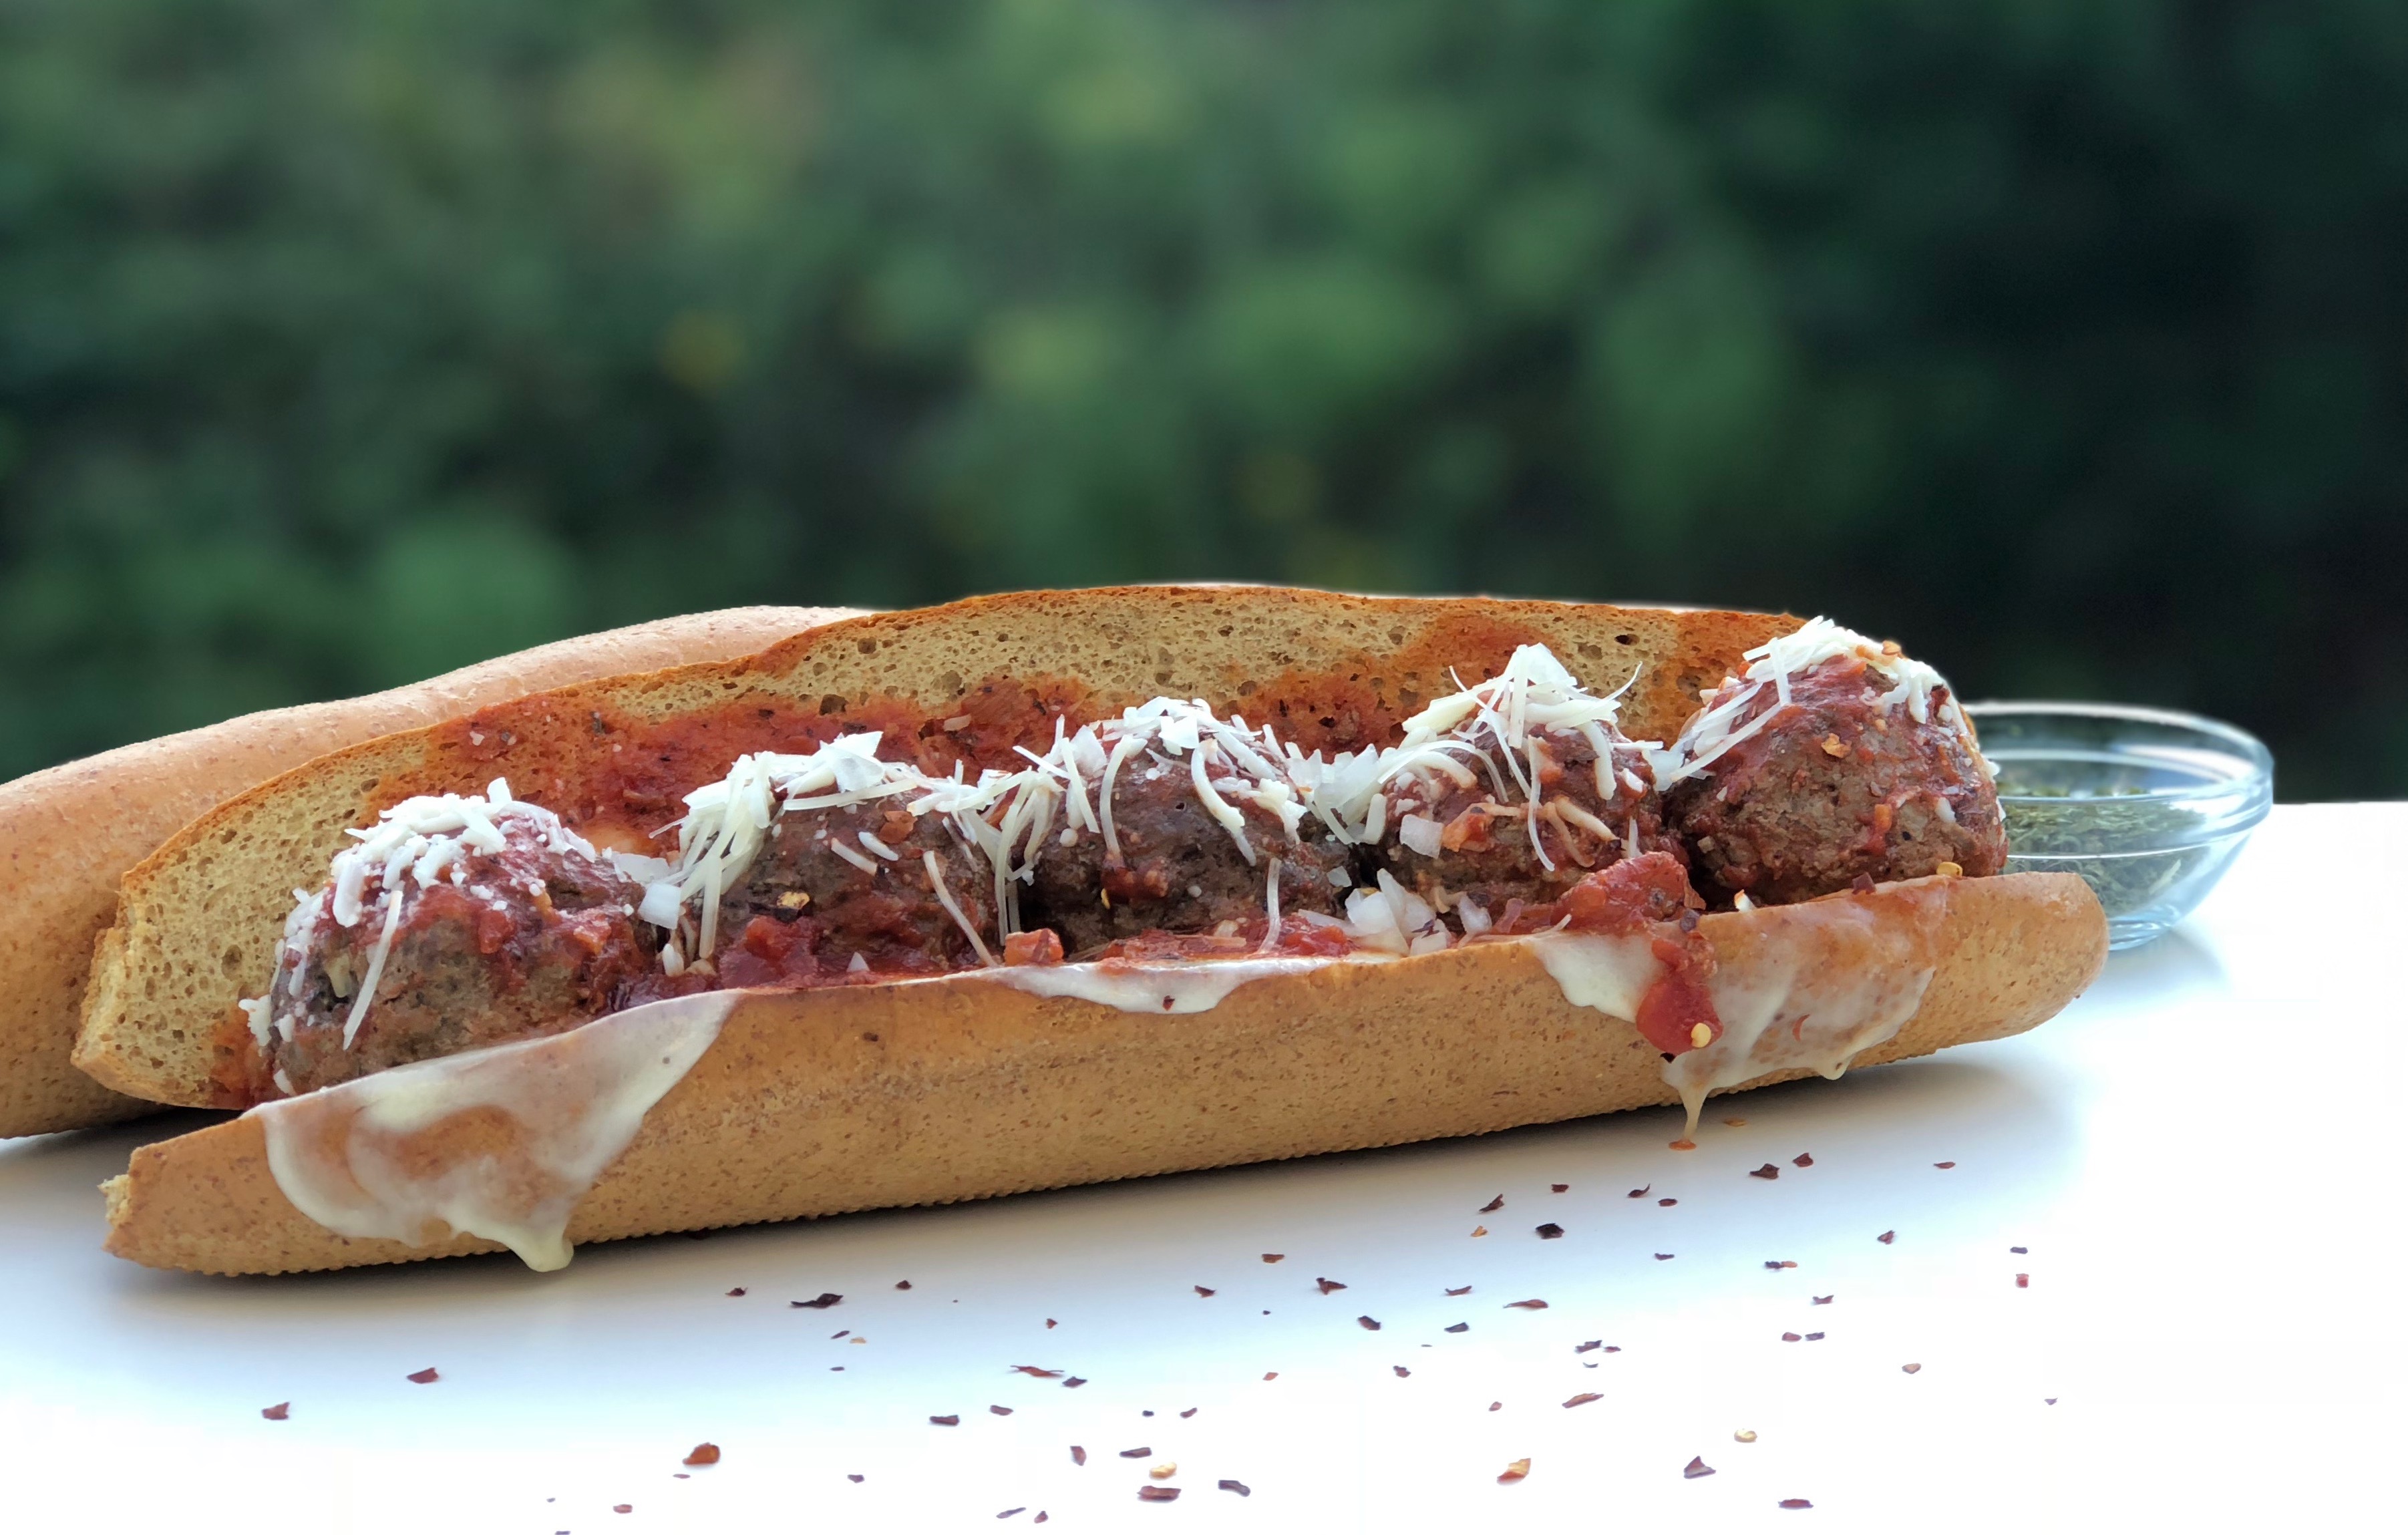 Thumbnail for Low Carb Footlong Meatball Sub